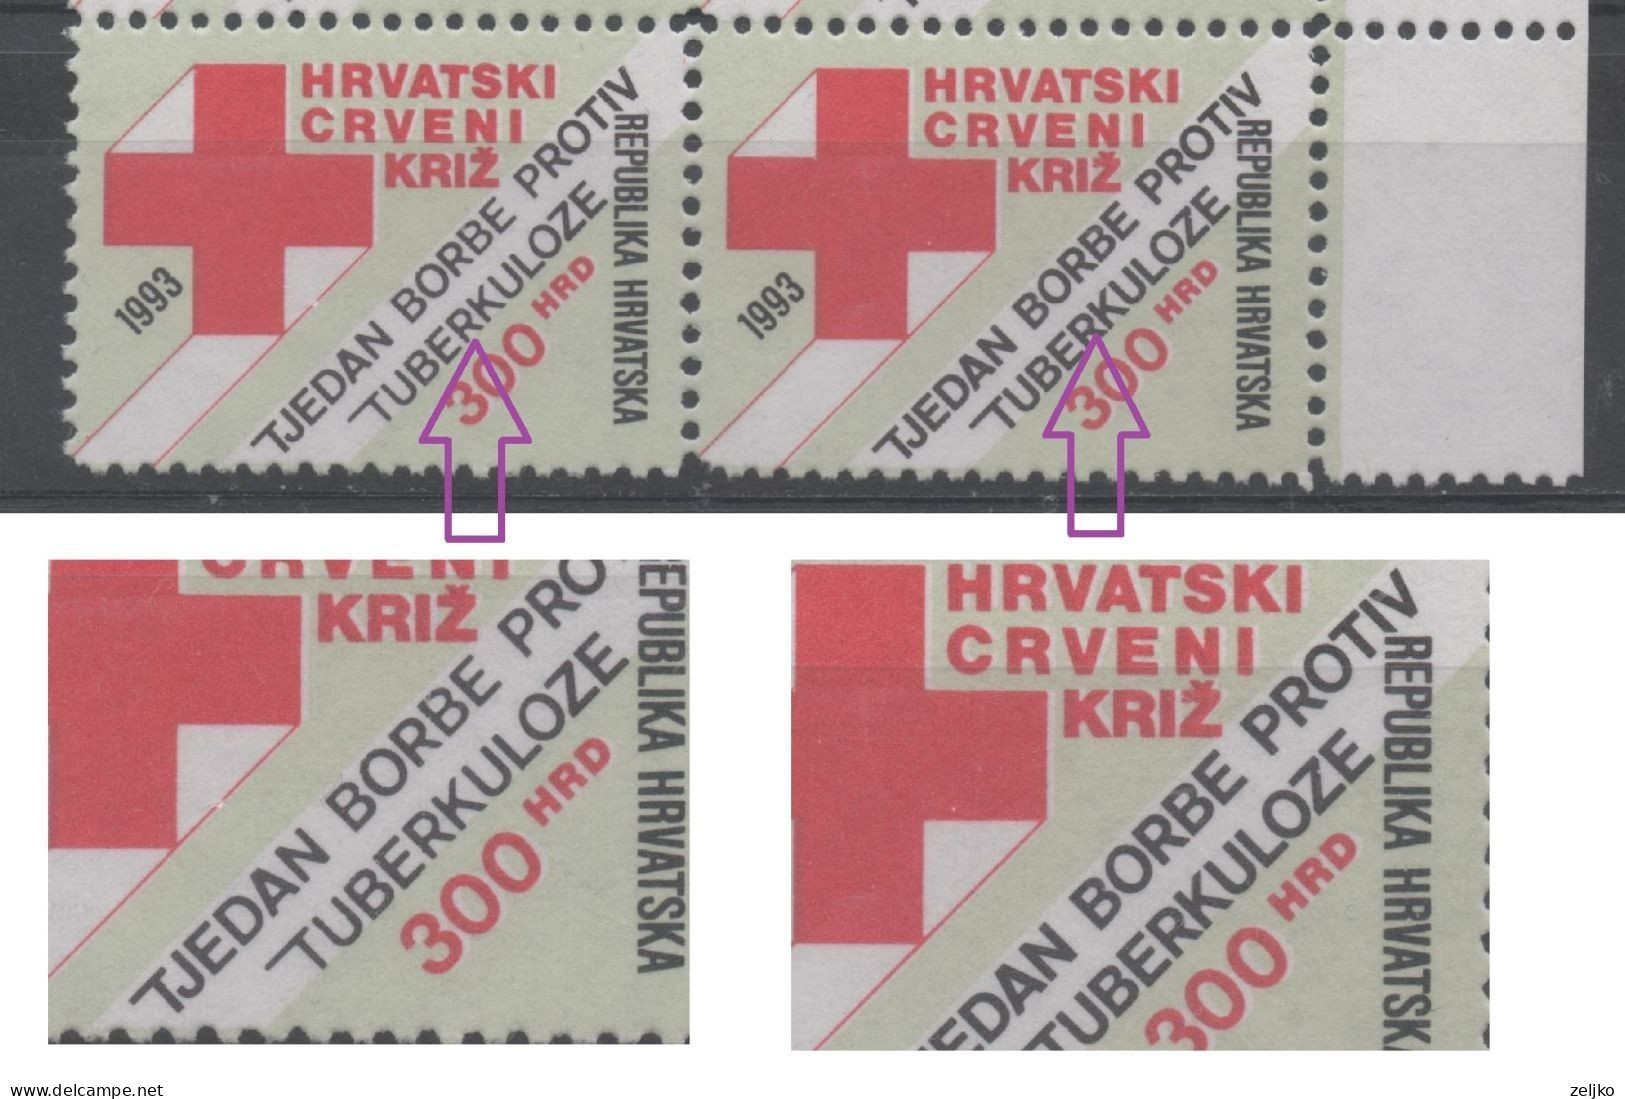 Croatia, Error, 1993, MNH, Michel 30, Difference In Thickness Of The Inscription, Red Cross - Kroatië